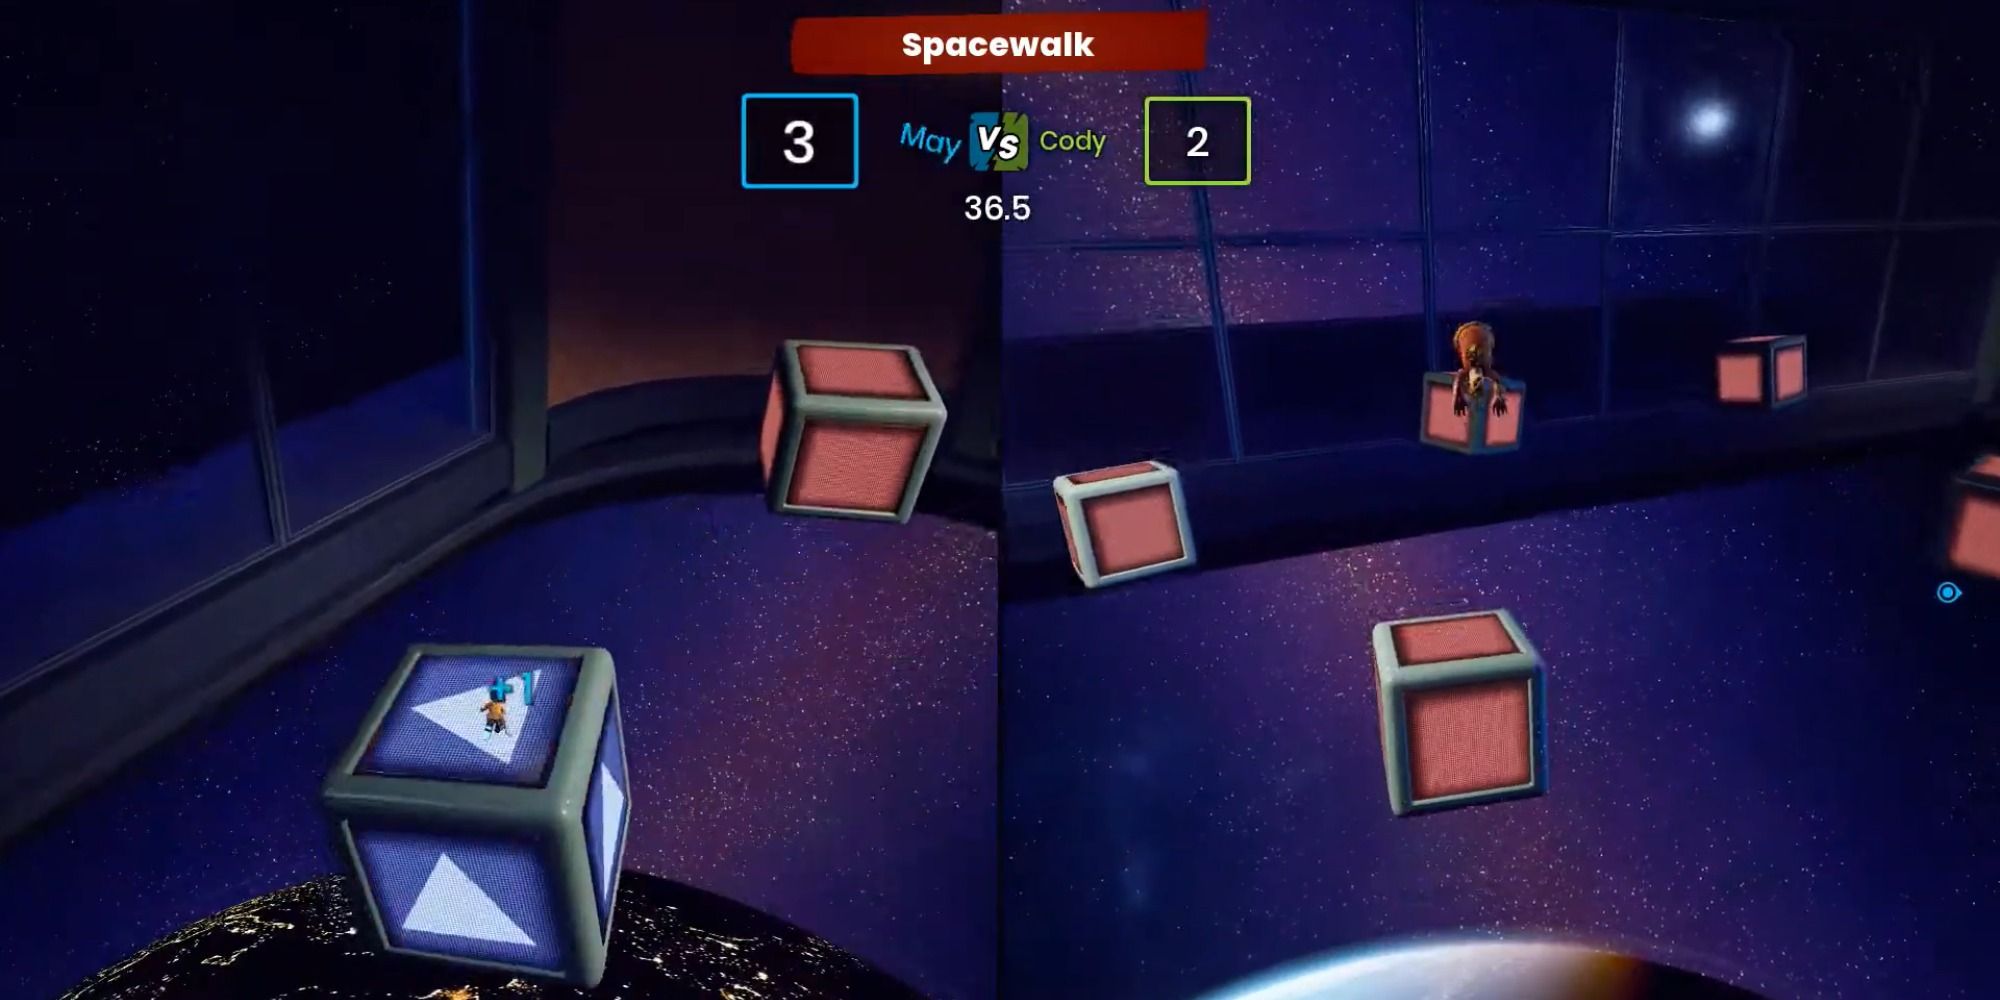 It Takes Two Spacewalk minigame jumping on blue and red blocks, score of 3-2